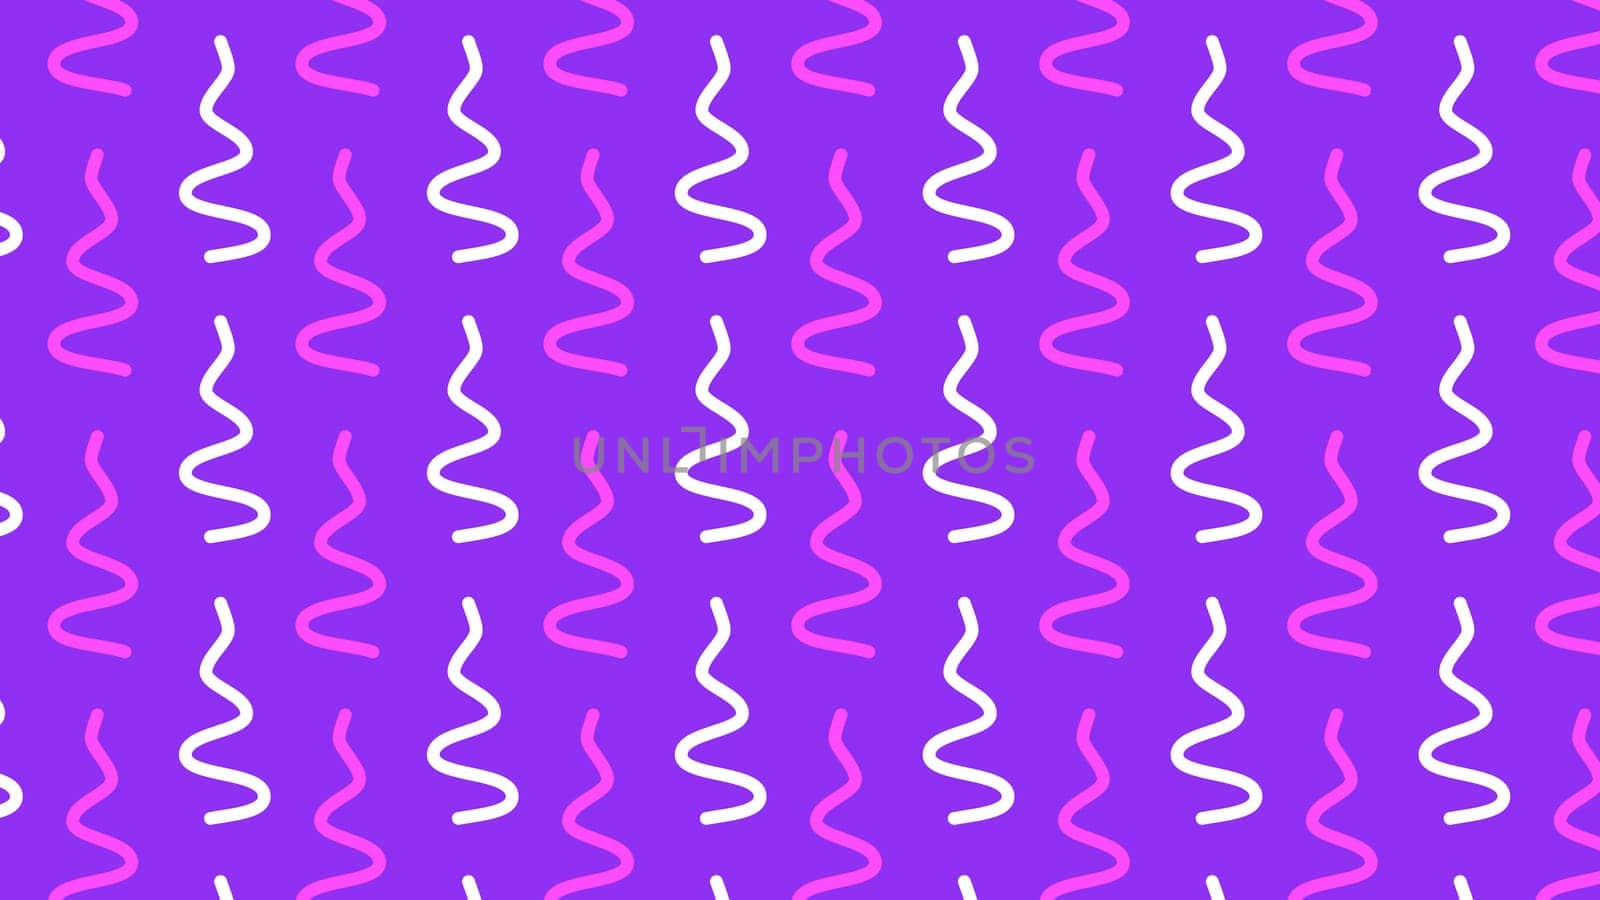 Minimal modern zig zag background. White and pink curved line on purple background. High quality